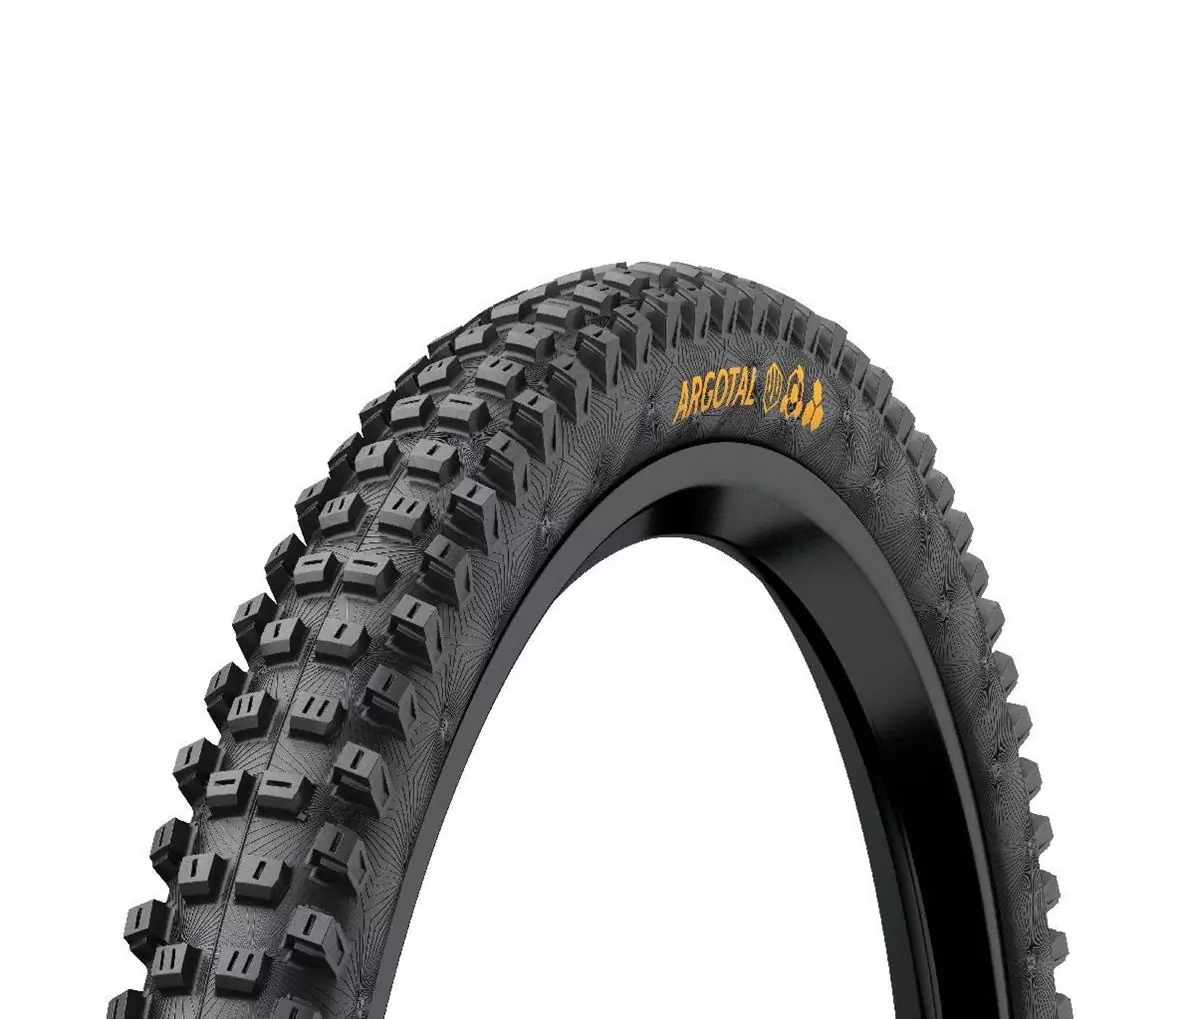 Argotal 27.5x2.40 Endurance-Compound/Trail Casing Folding Tubeless Ready Tire - image